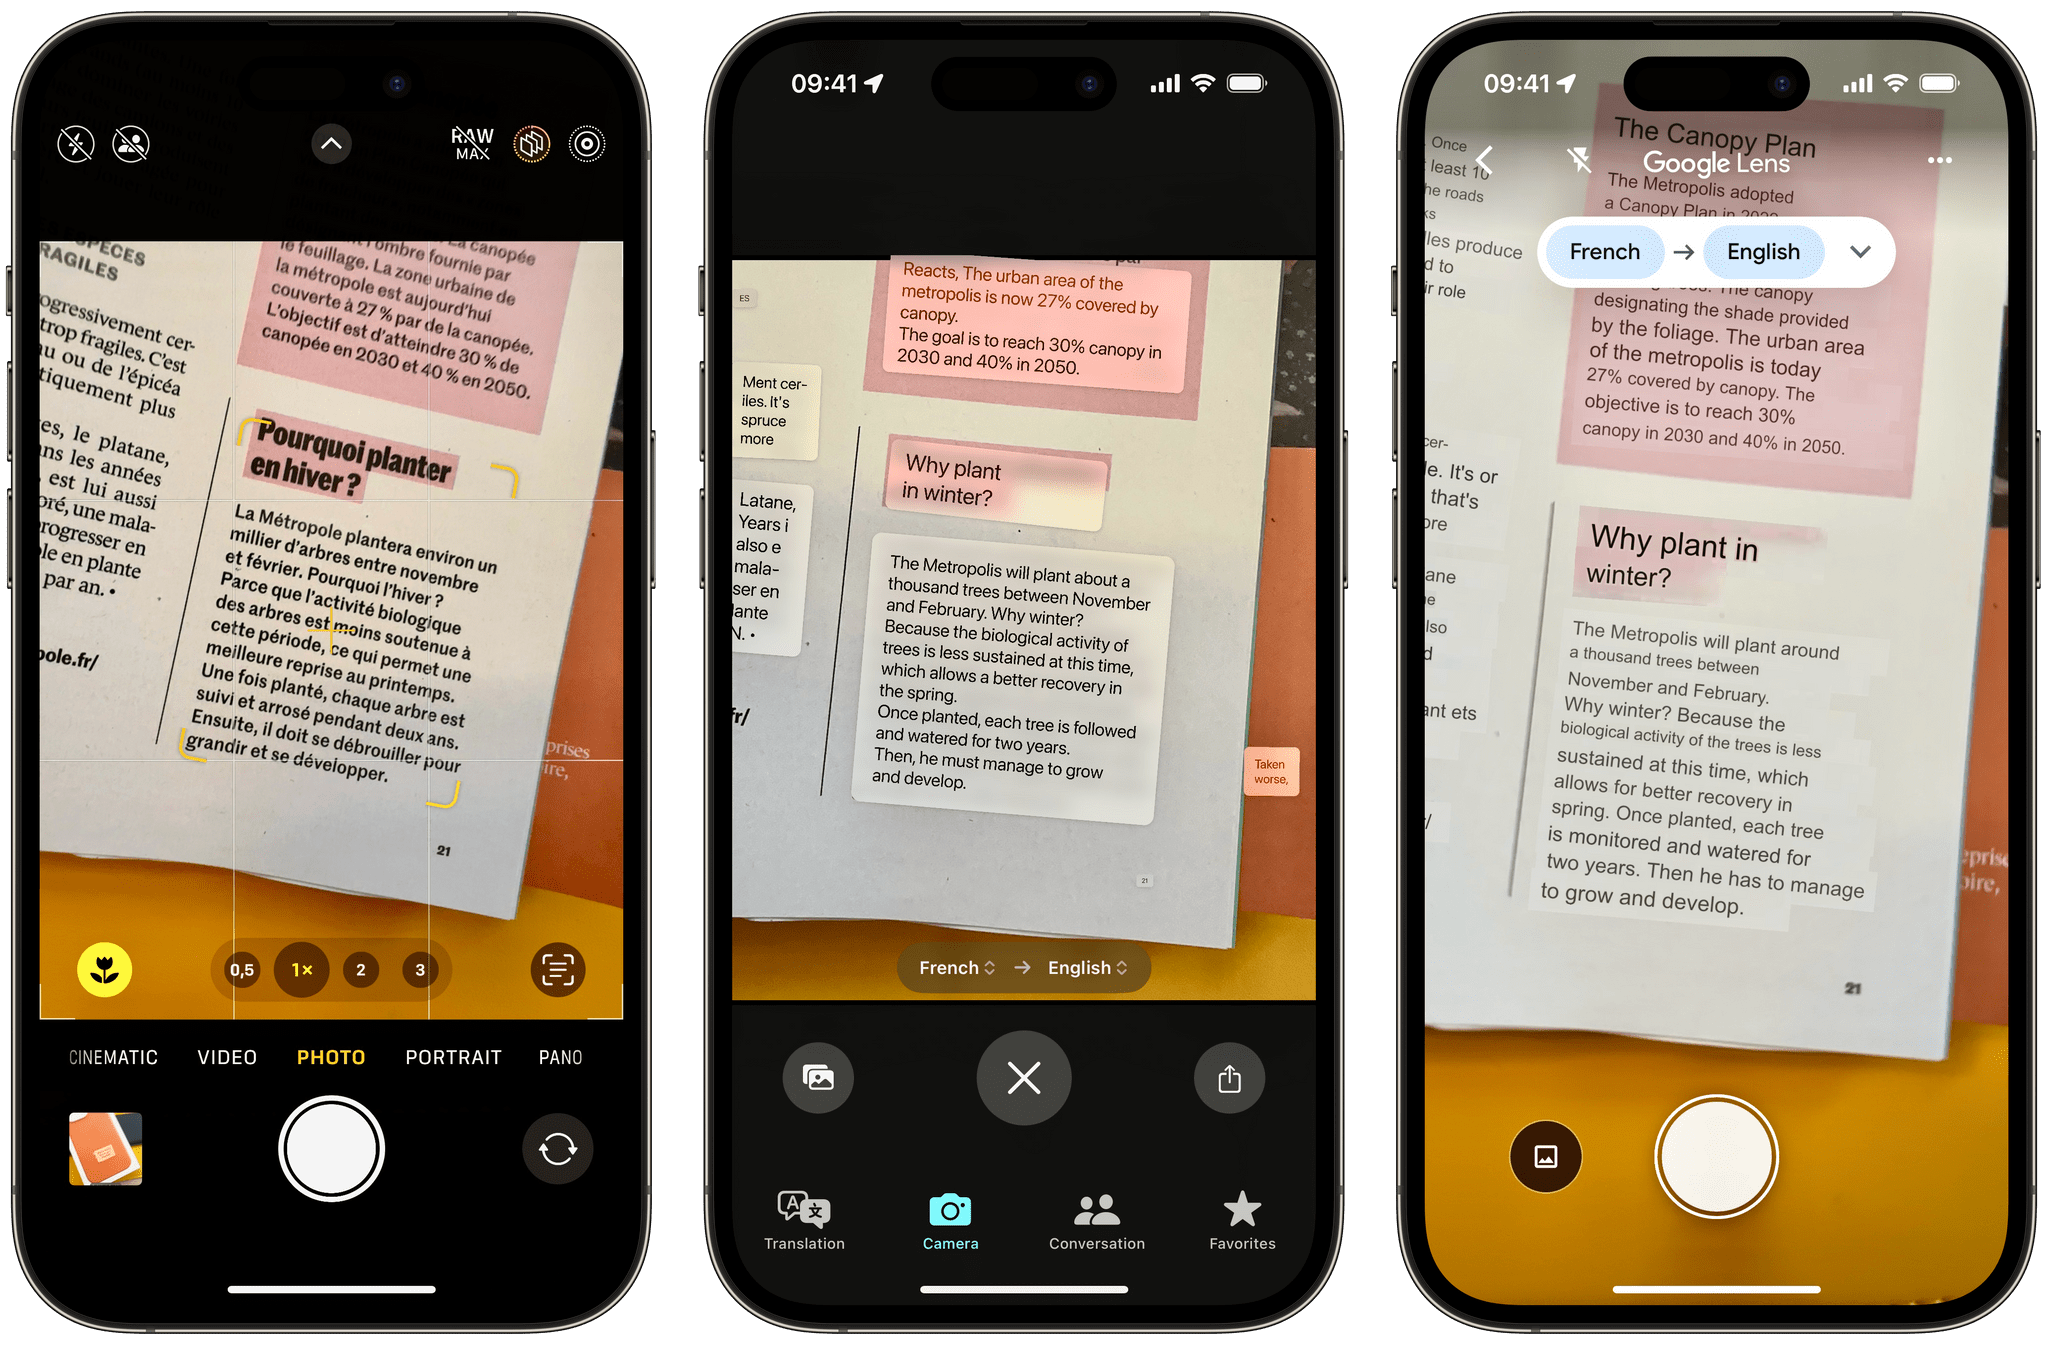 Translating a column from a French magazine. Left is the original text viewed from the iPhone Camera. Center is the translated text in Apple's Translate app. Right is the translated text in Google Translate.